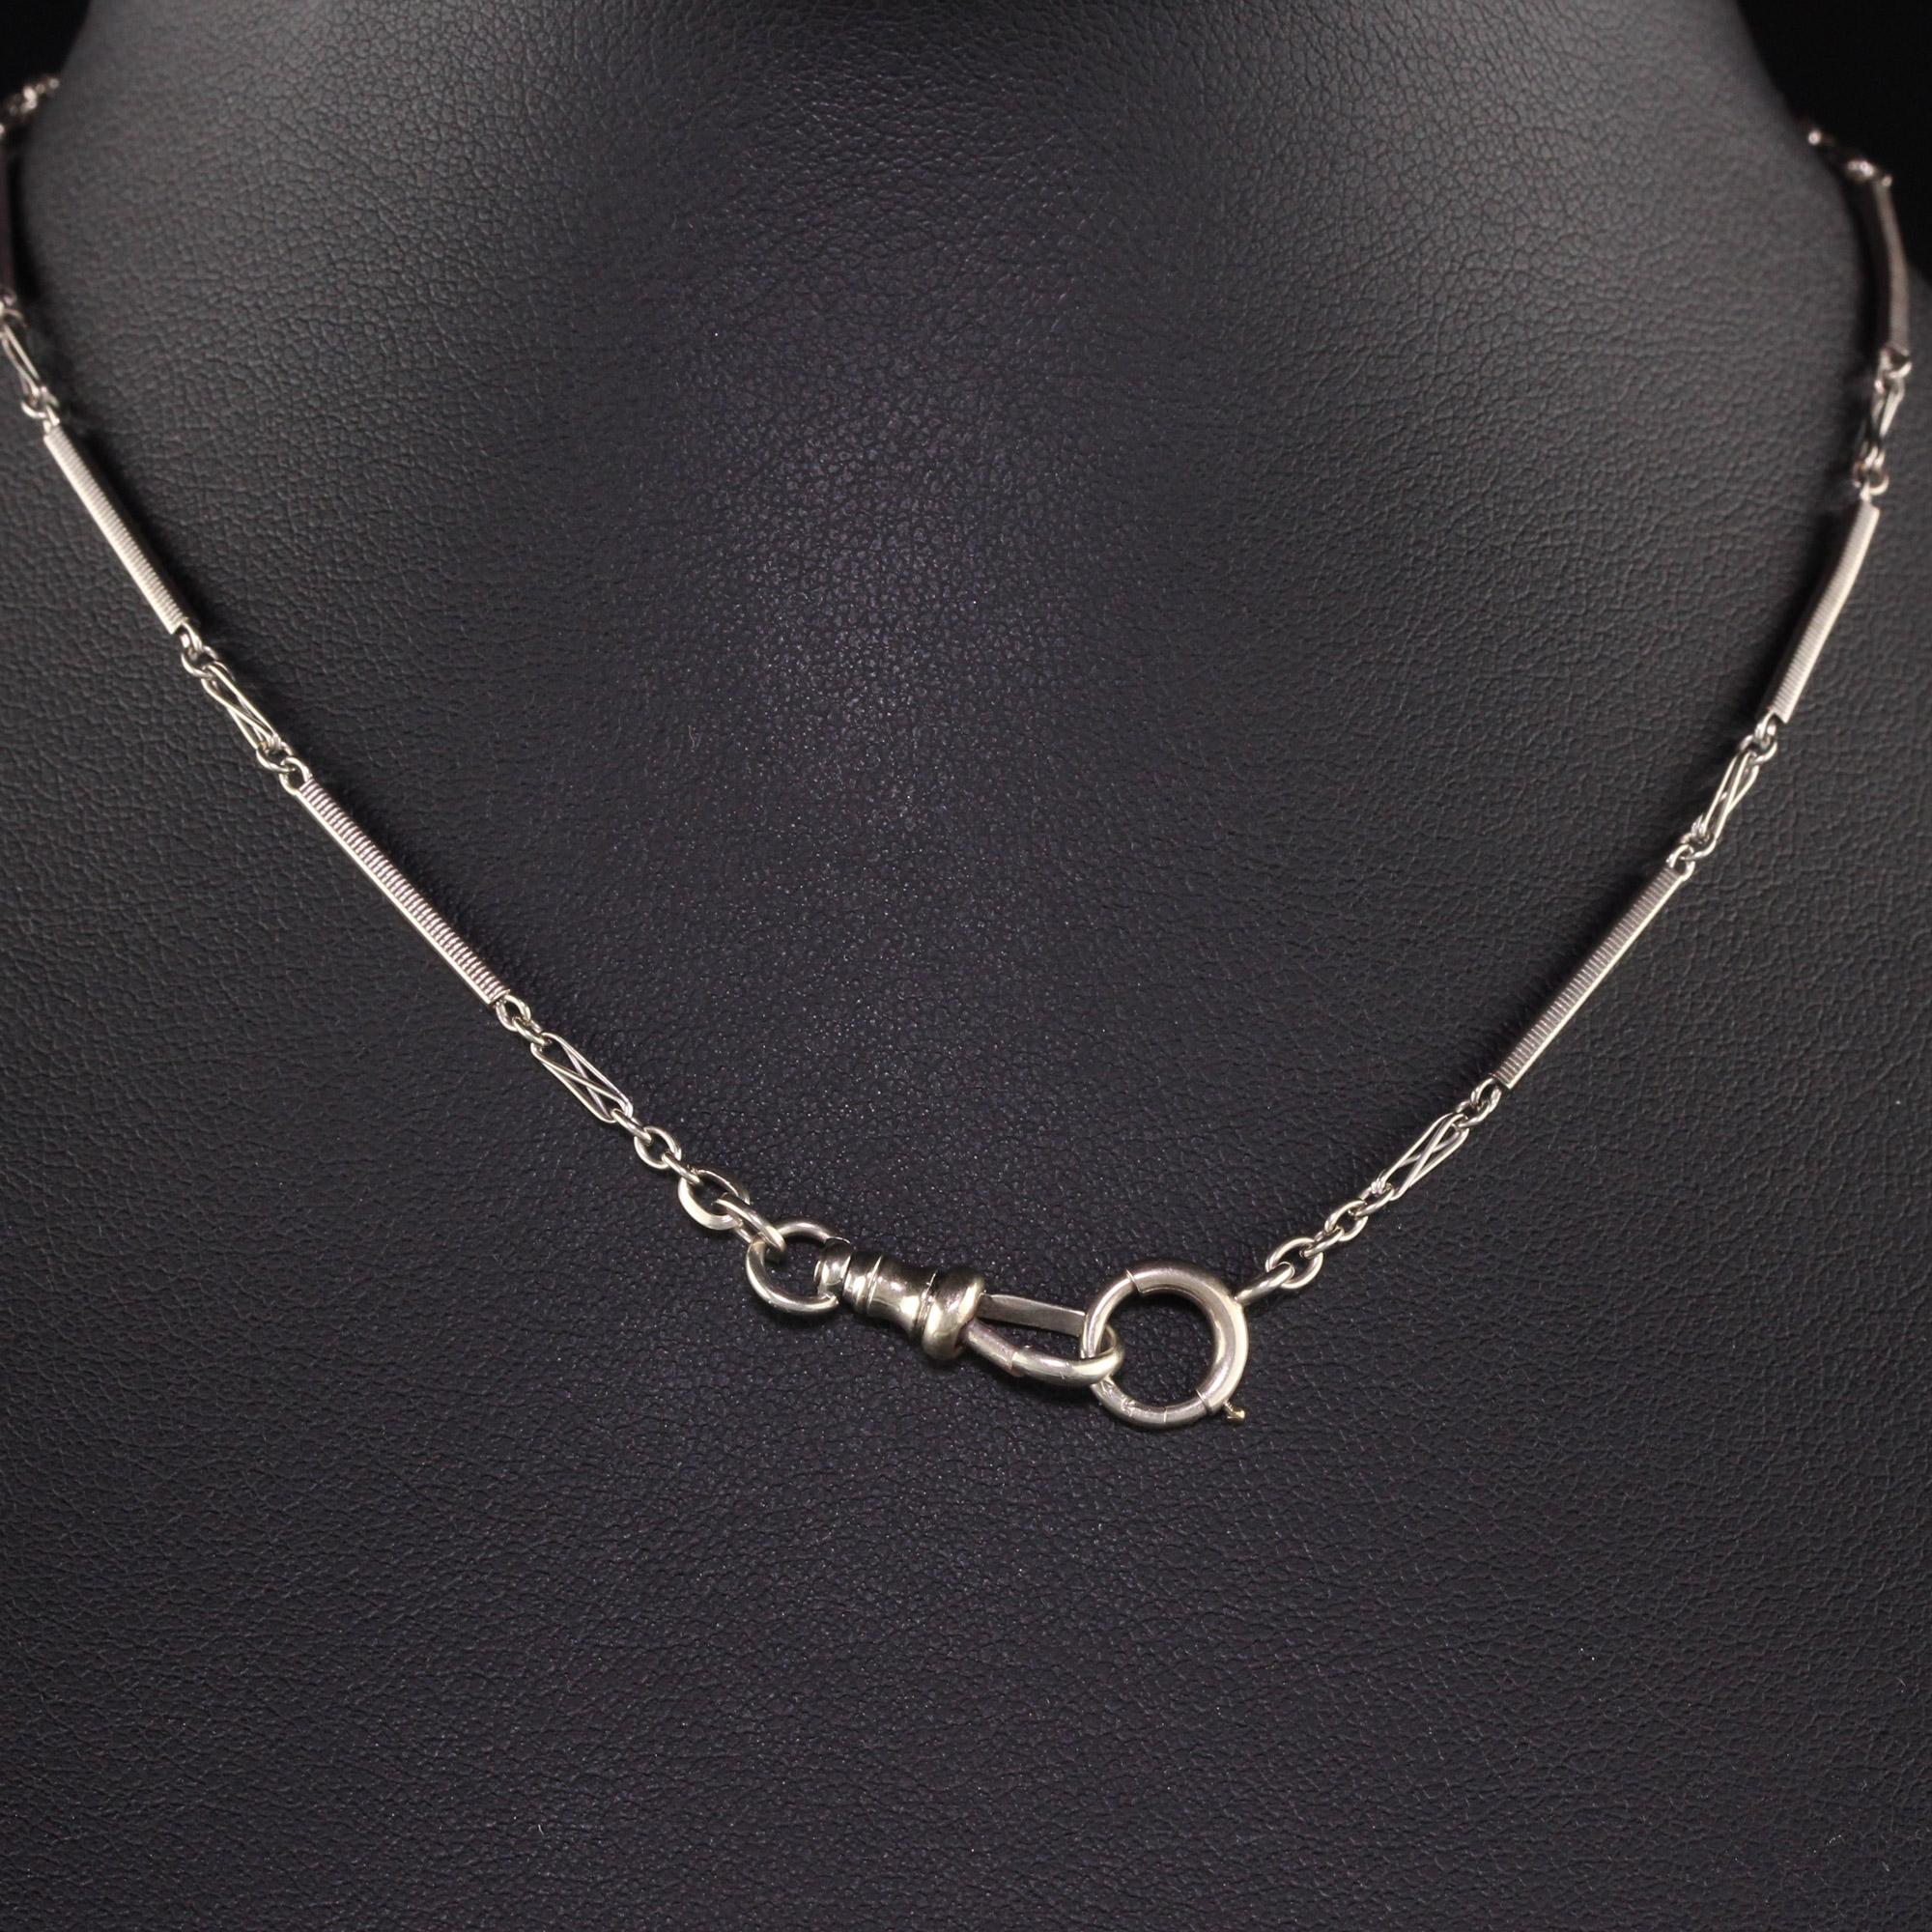 Antique Art Deco 14K White Gold Intricate Link Chain For Sale 2